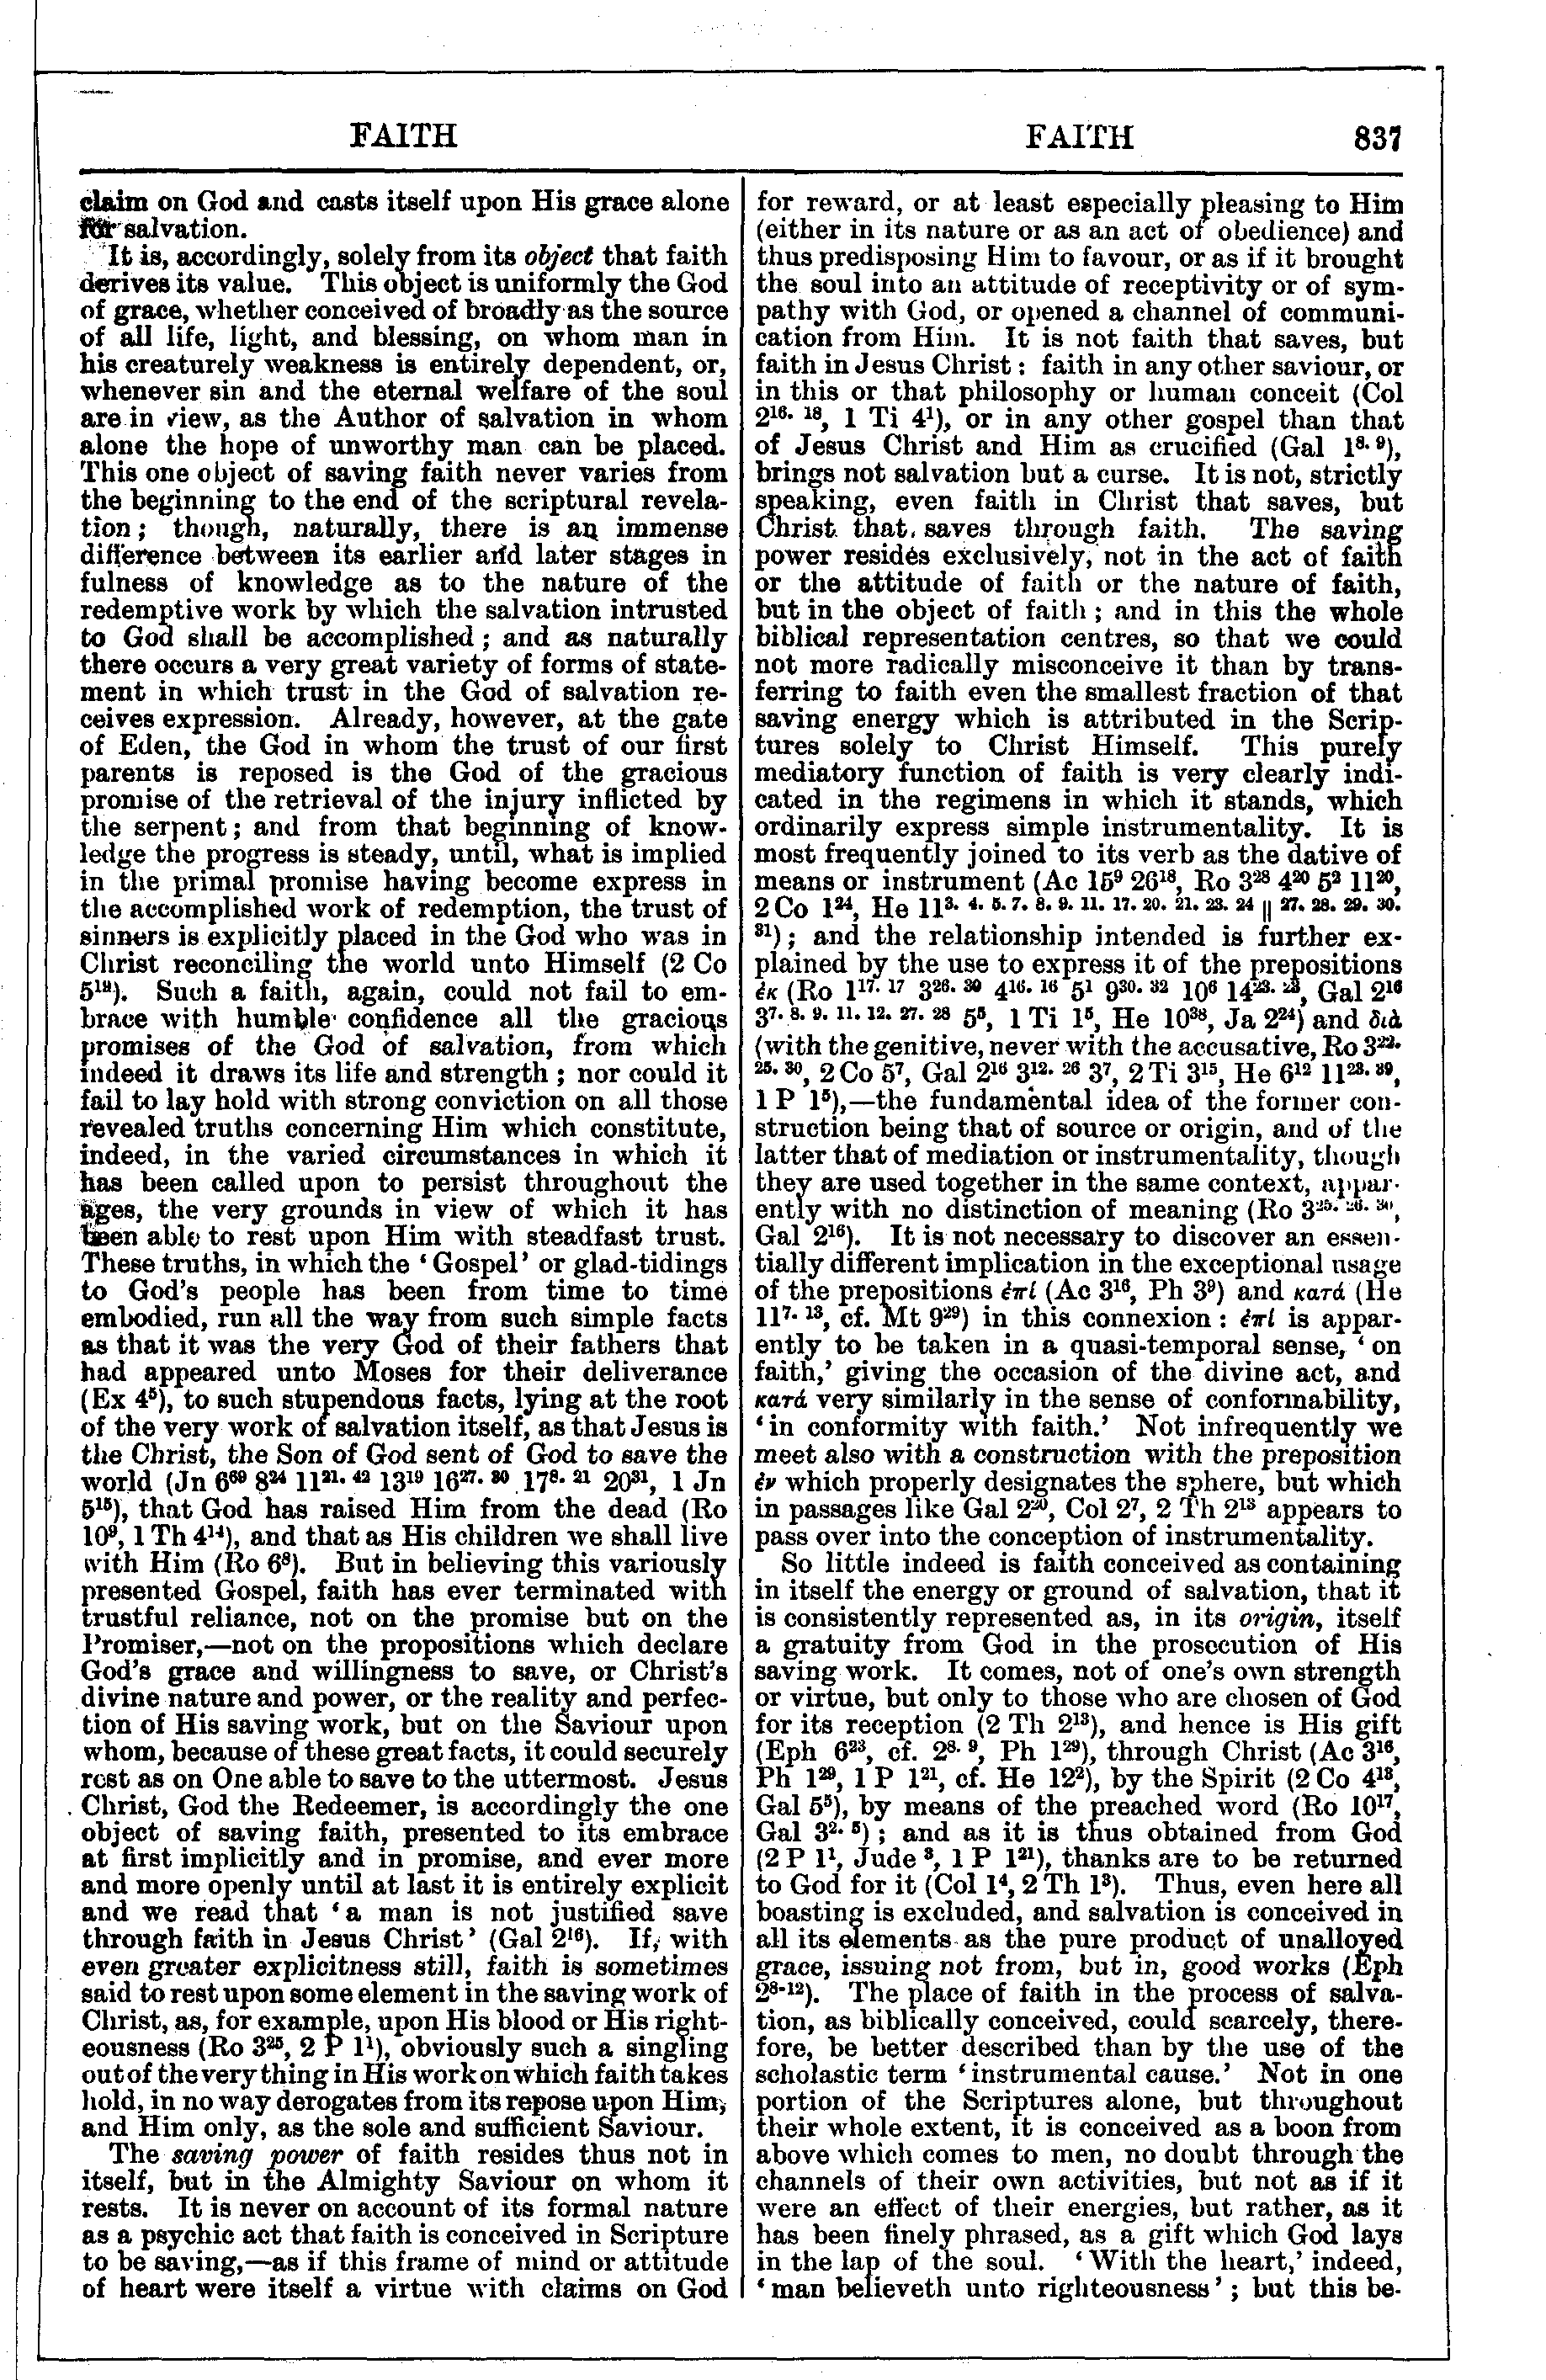 Image of page 837